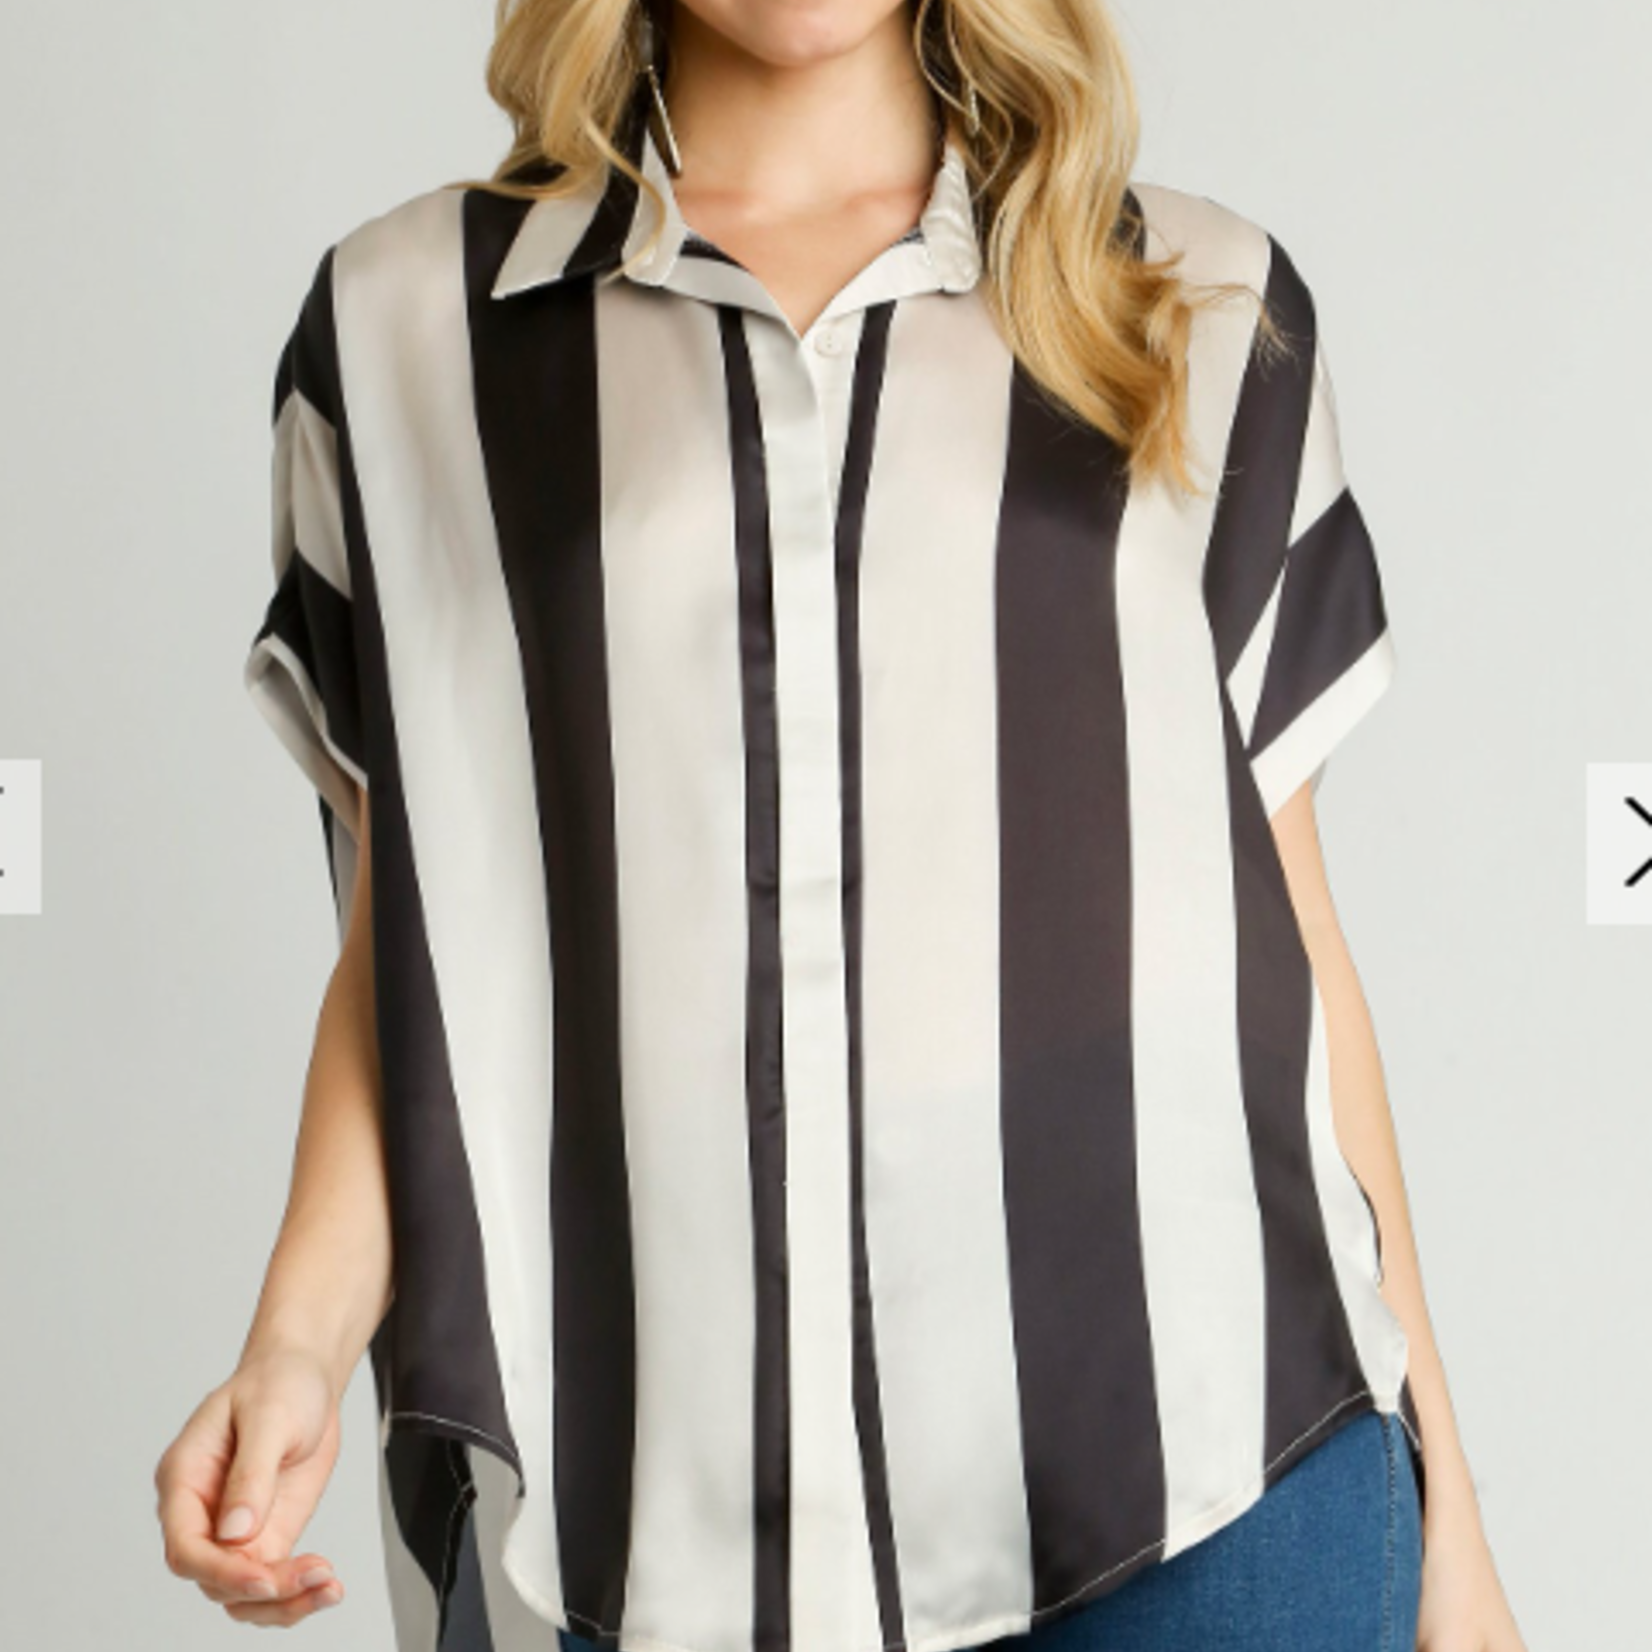 Striped Button Down with High Low Trim Top